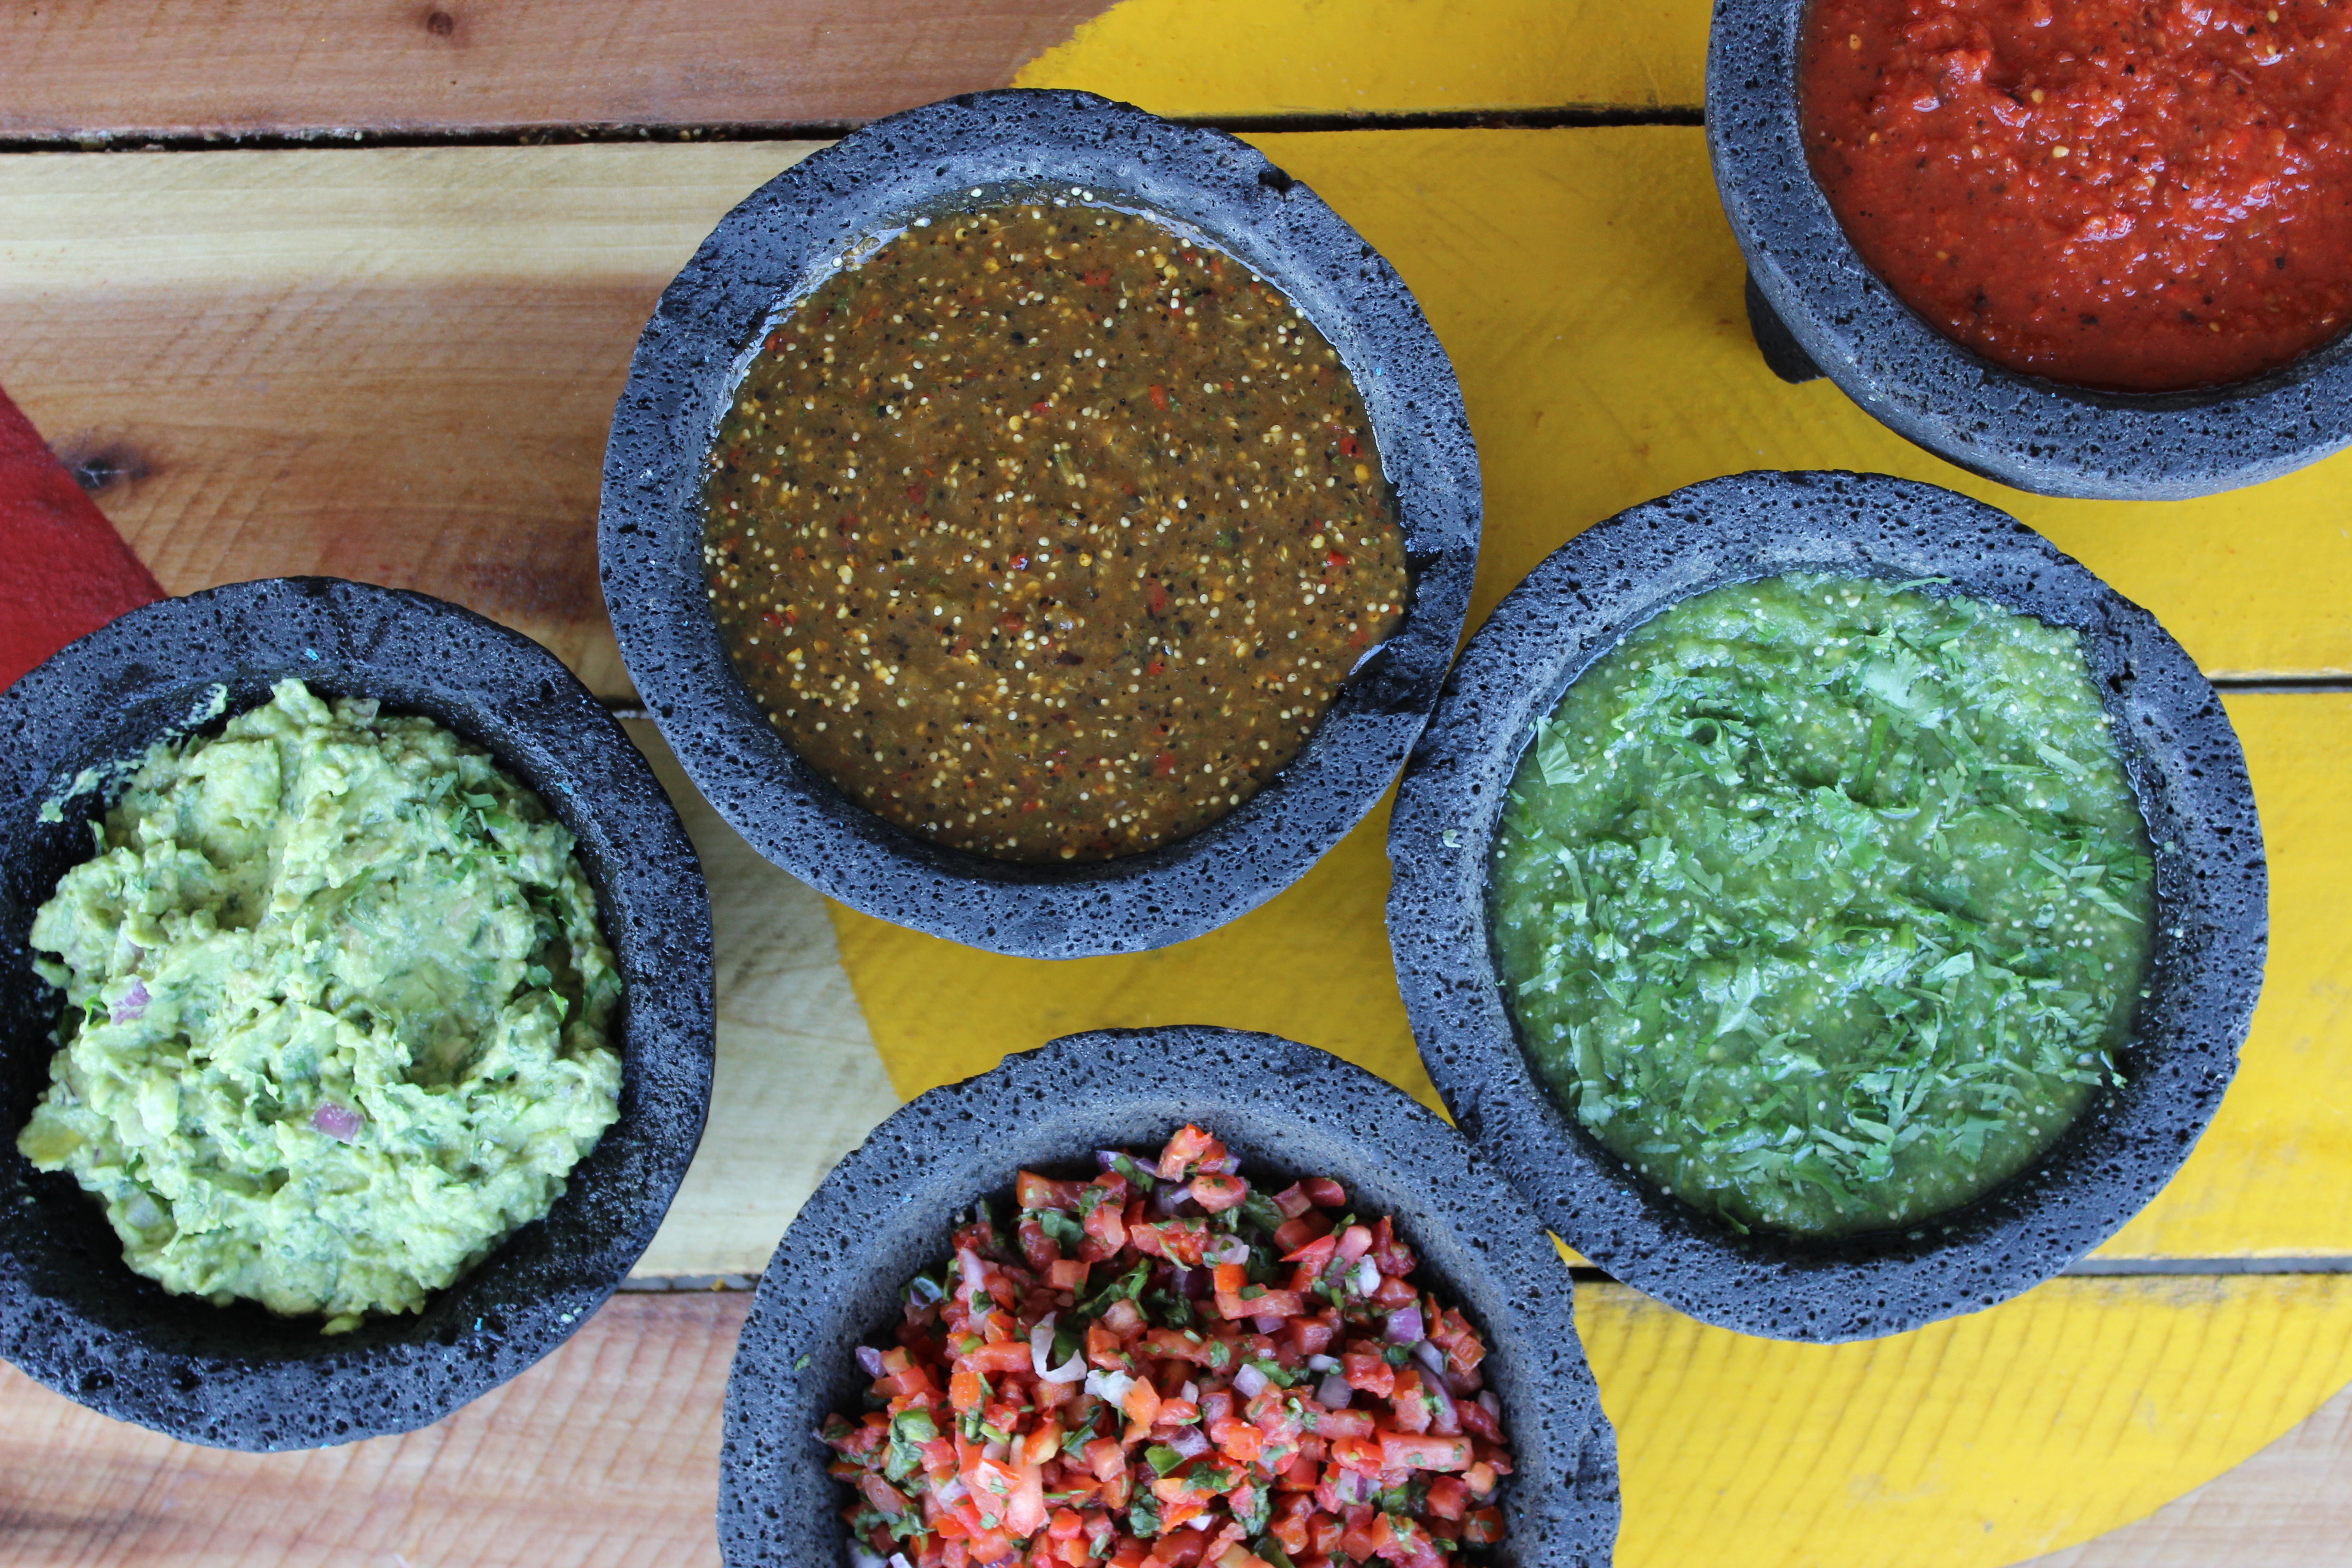 Bowls of sauces and dips for the nachos and tacos